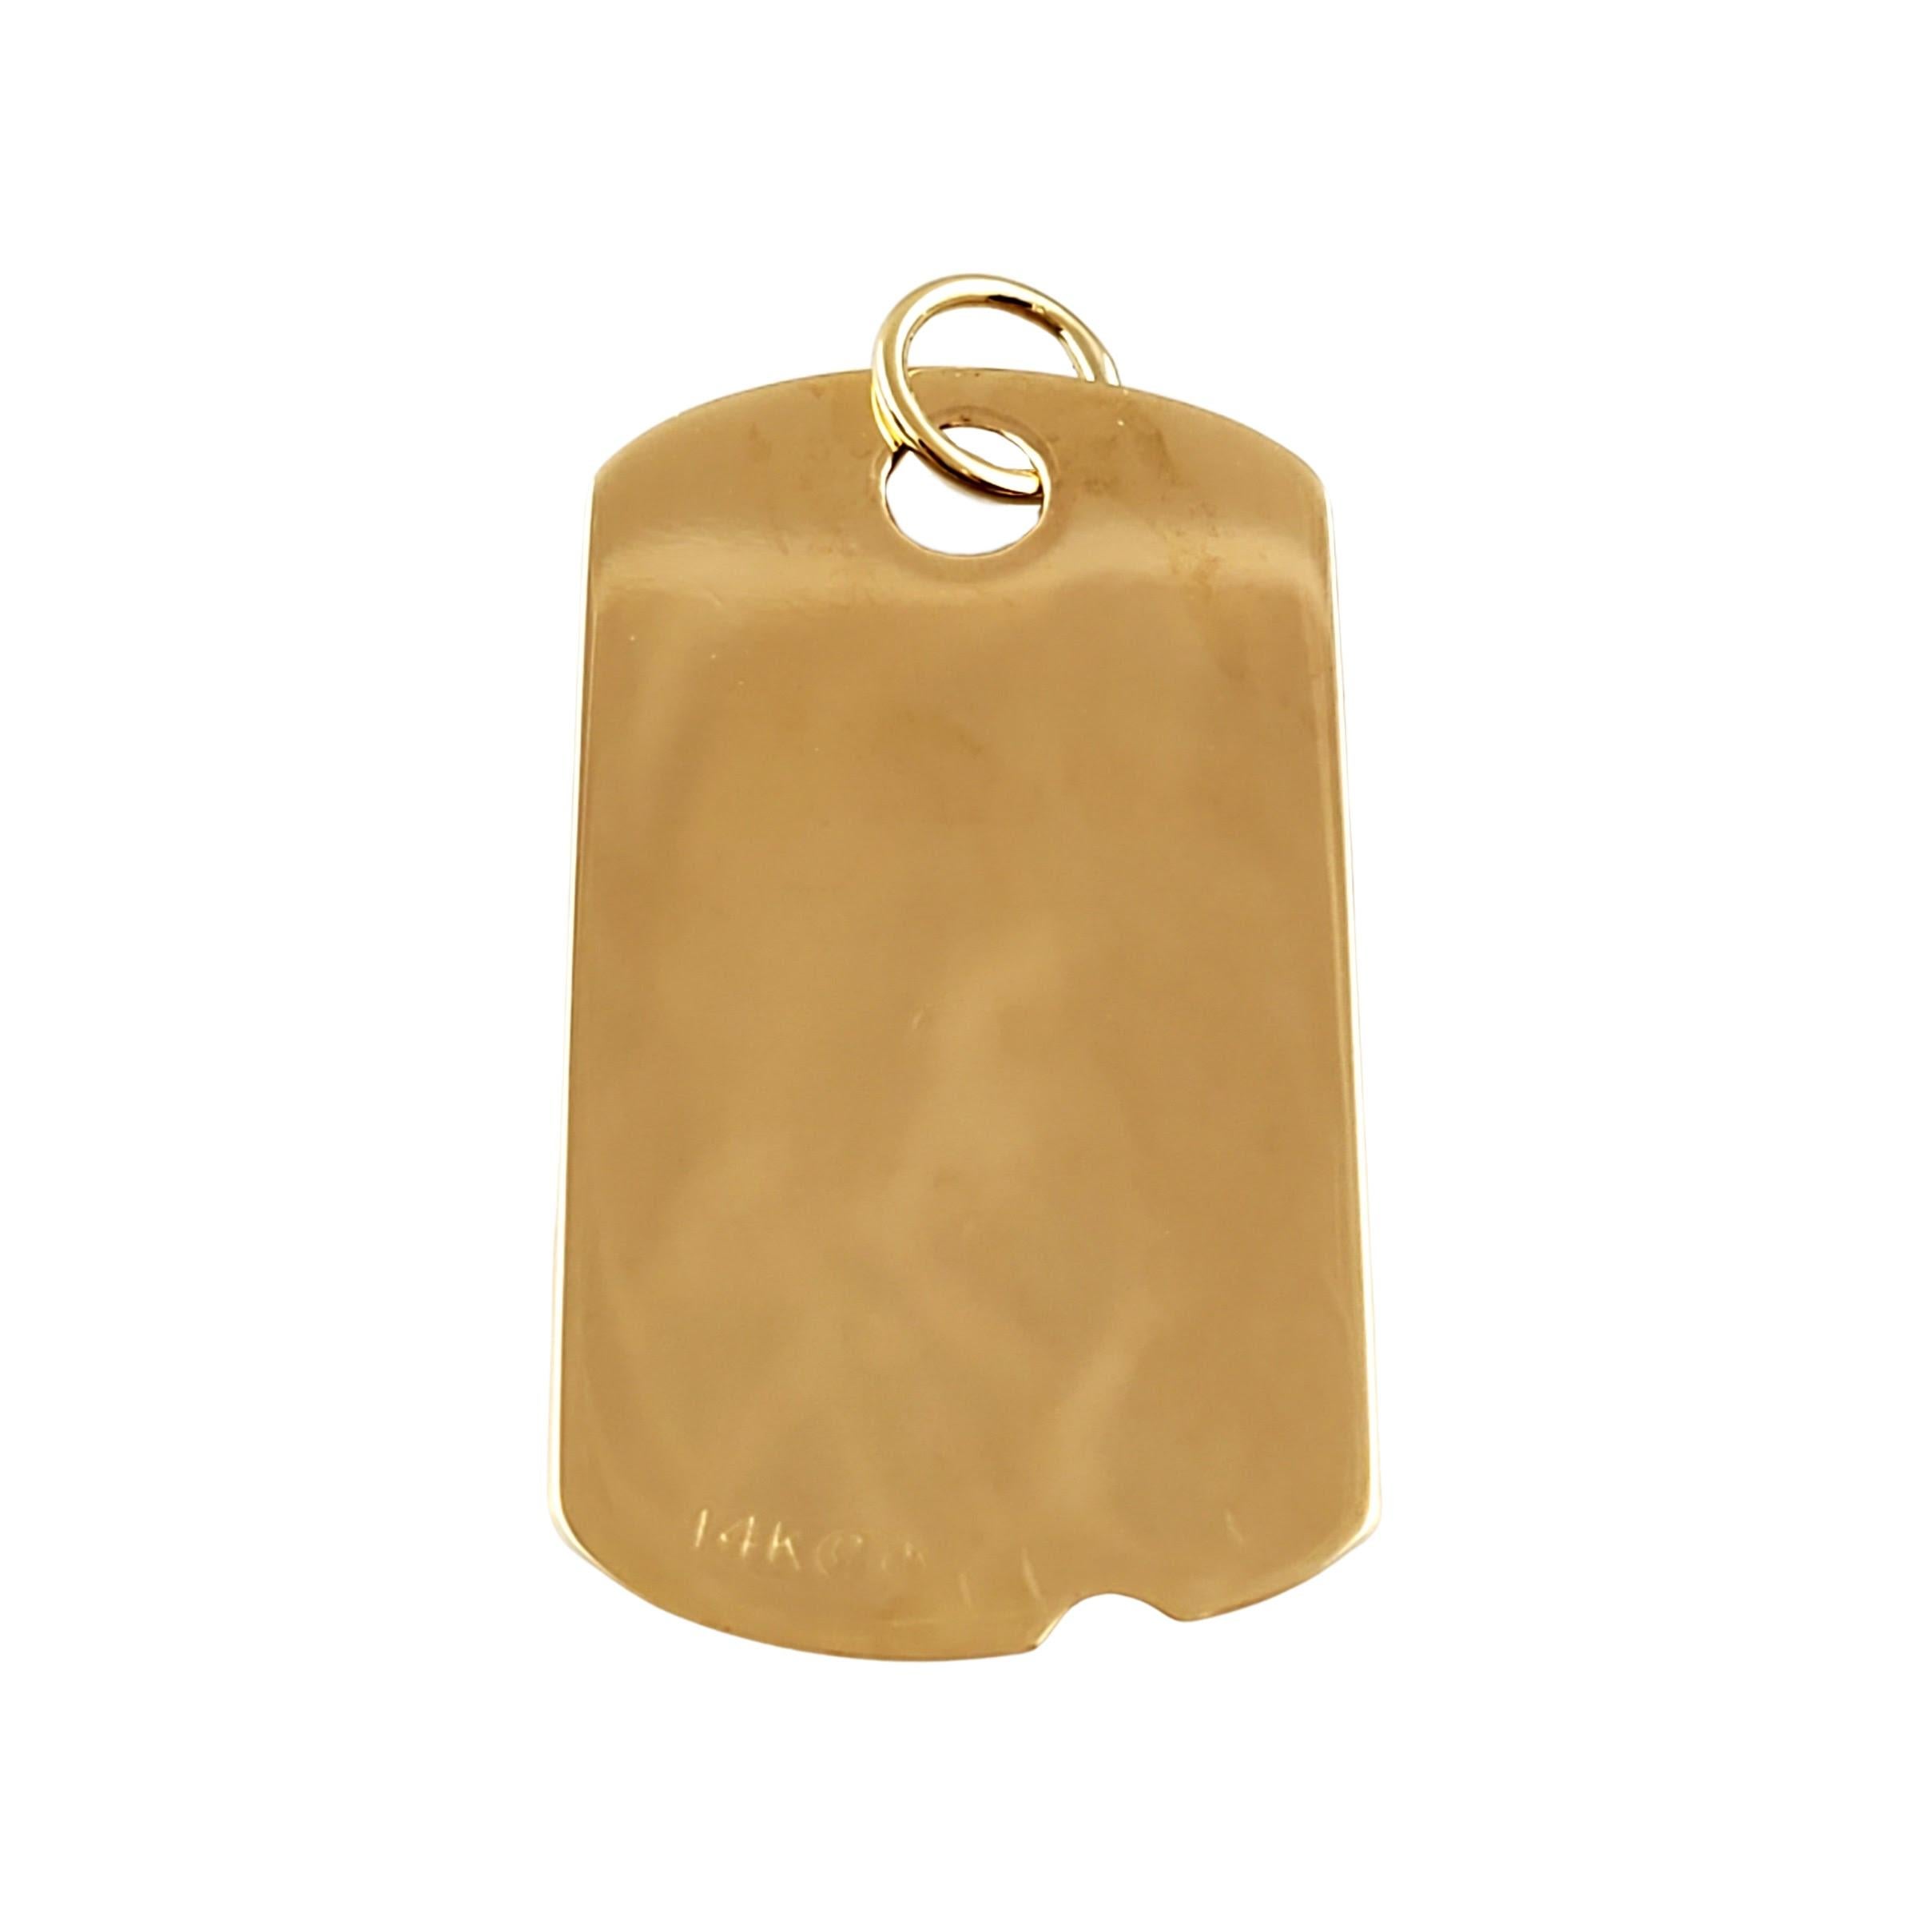 14K Yellow Gold Medical Dog tag

A wonderful way to say thank you to the medical worker in your life with this beautiful pendent.

Gorgeous 14K yellow gold dog tag style medical pendent features a caduceus which is also known as the Staff of Hermes.